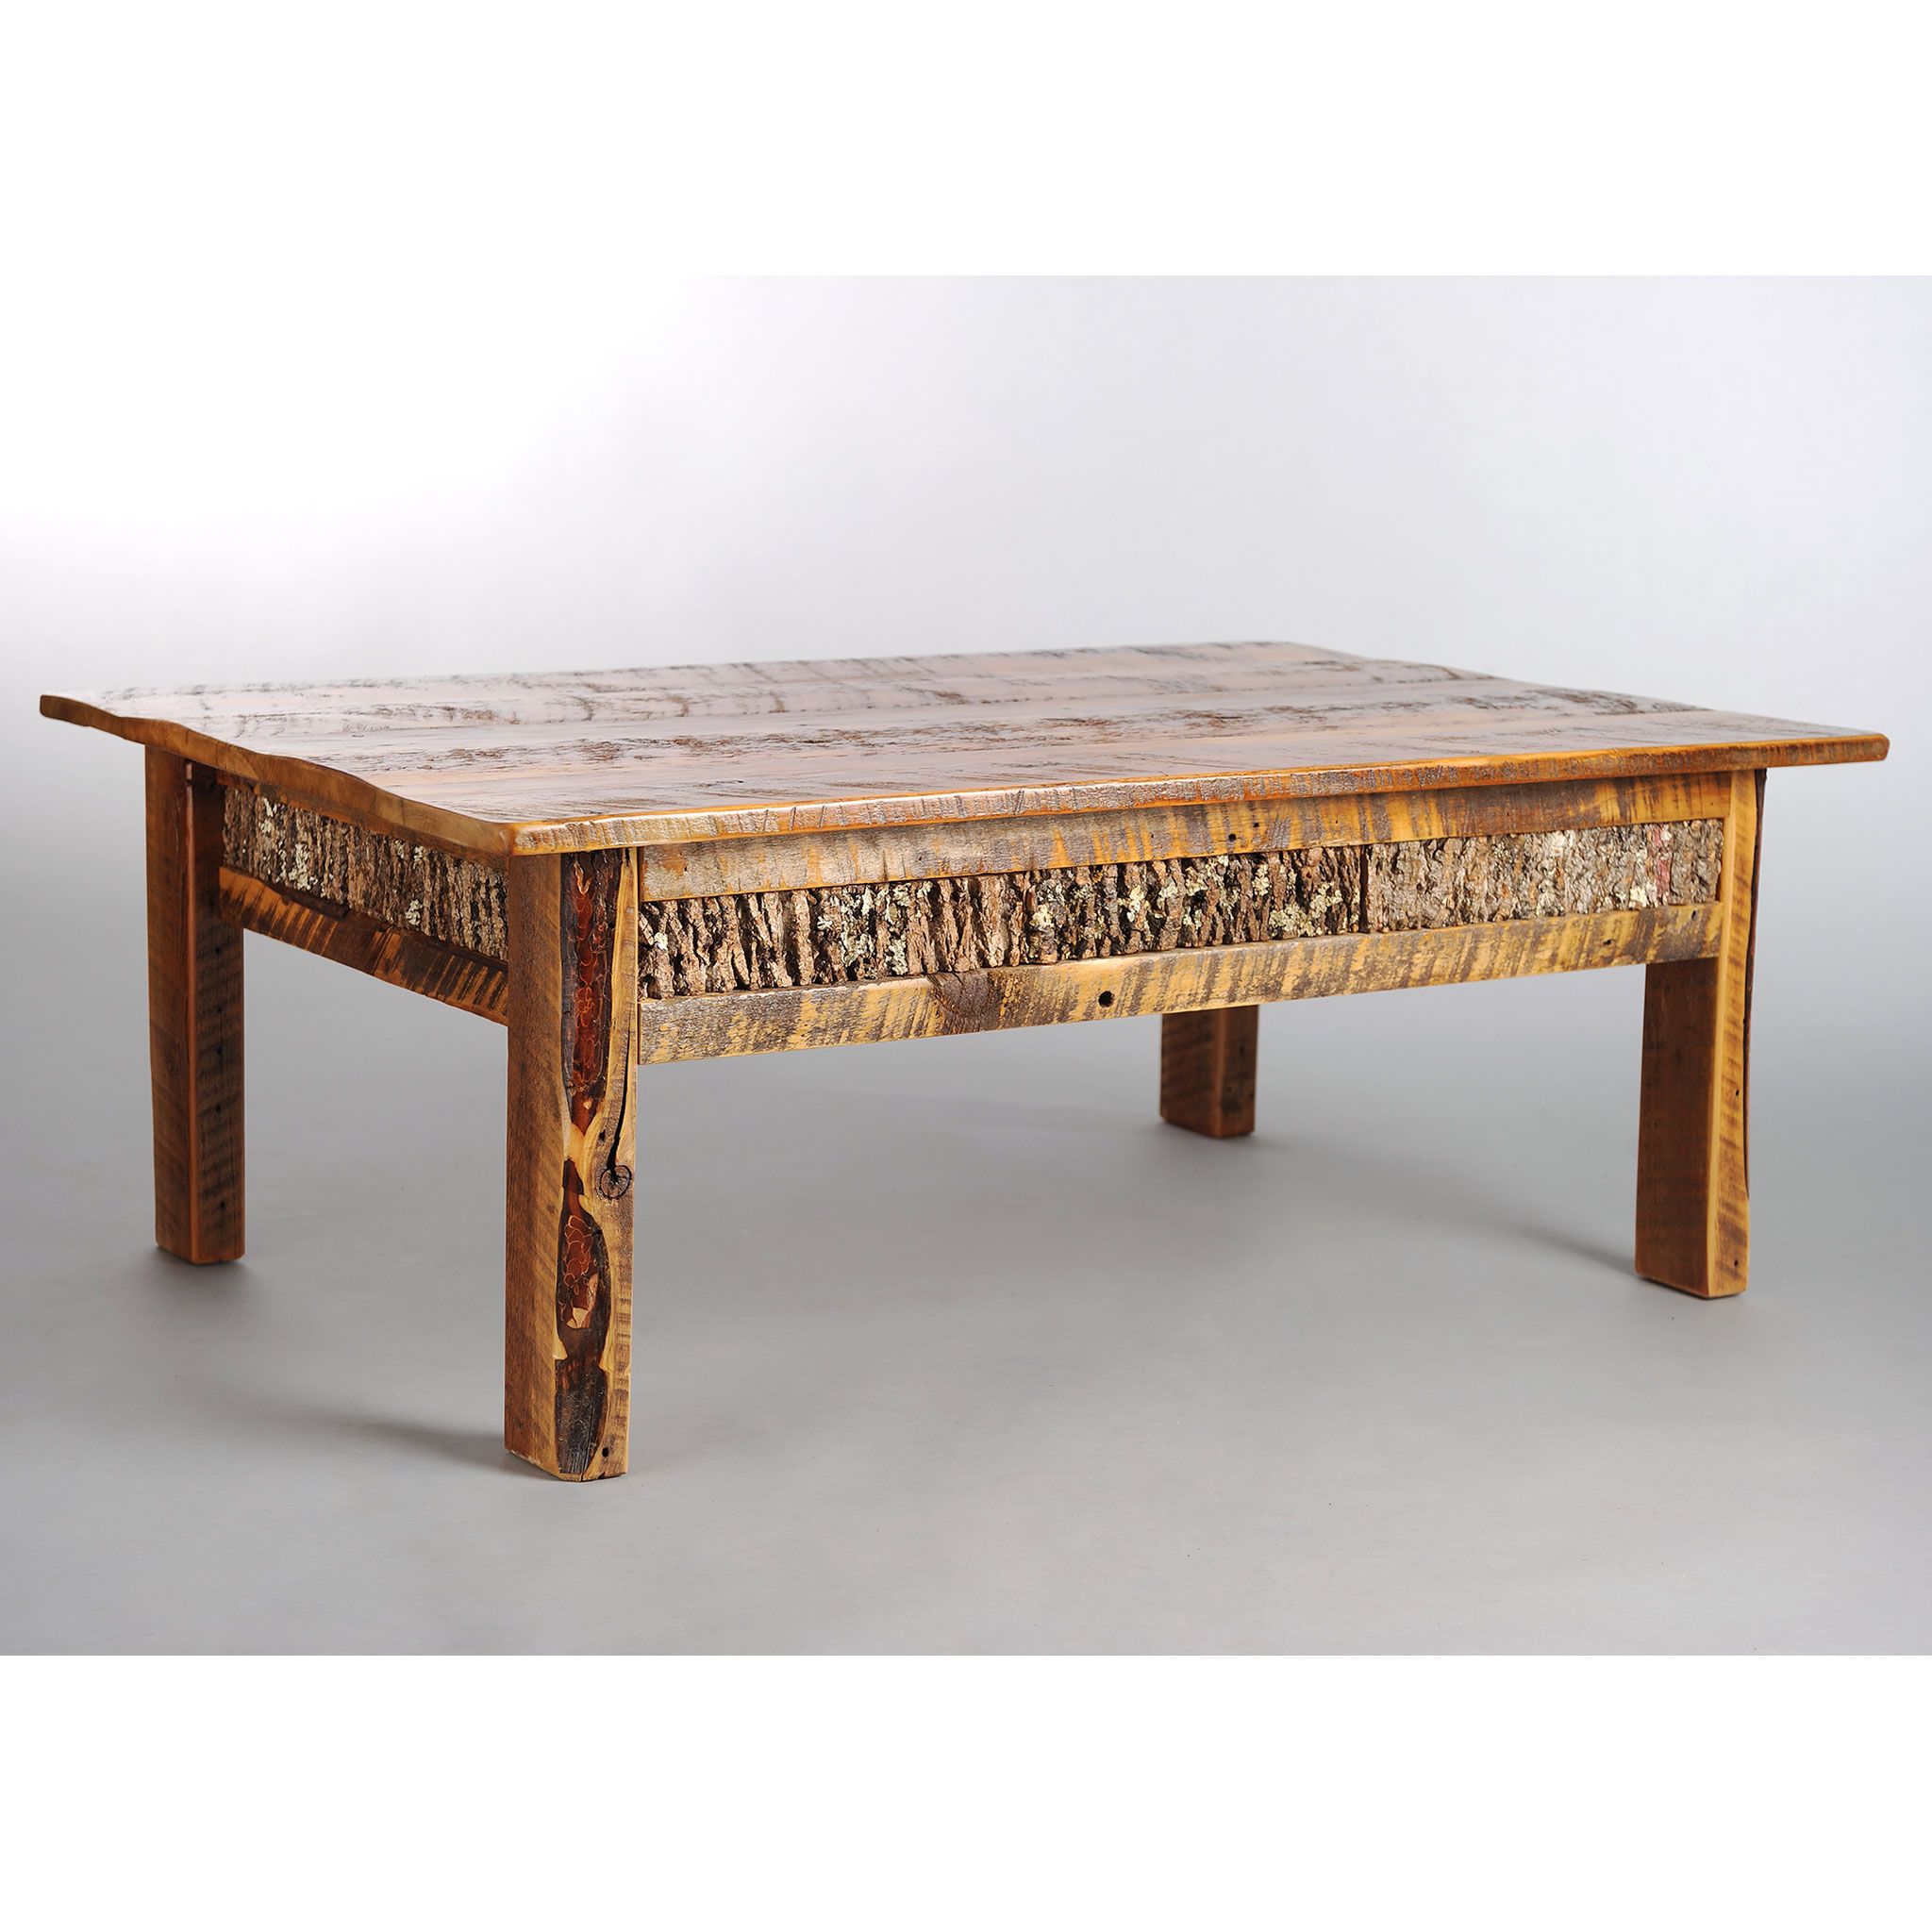 Newest Barnwood Coffee Tables For Reclaimed Wood Coffee Table With Bark Inlay (View 8 of 20)